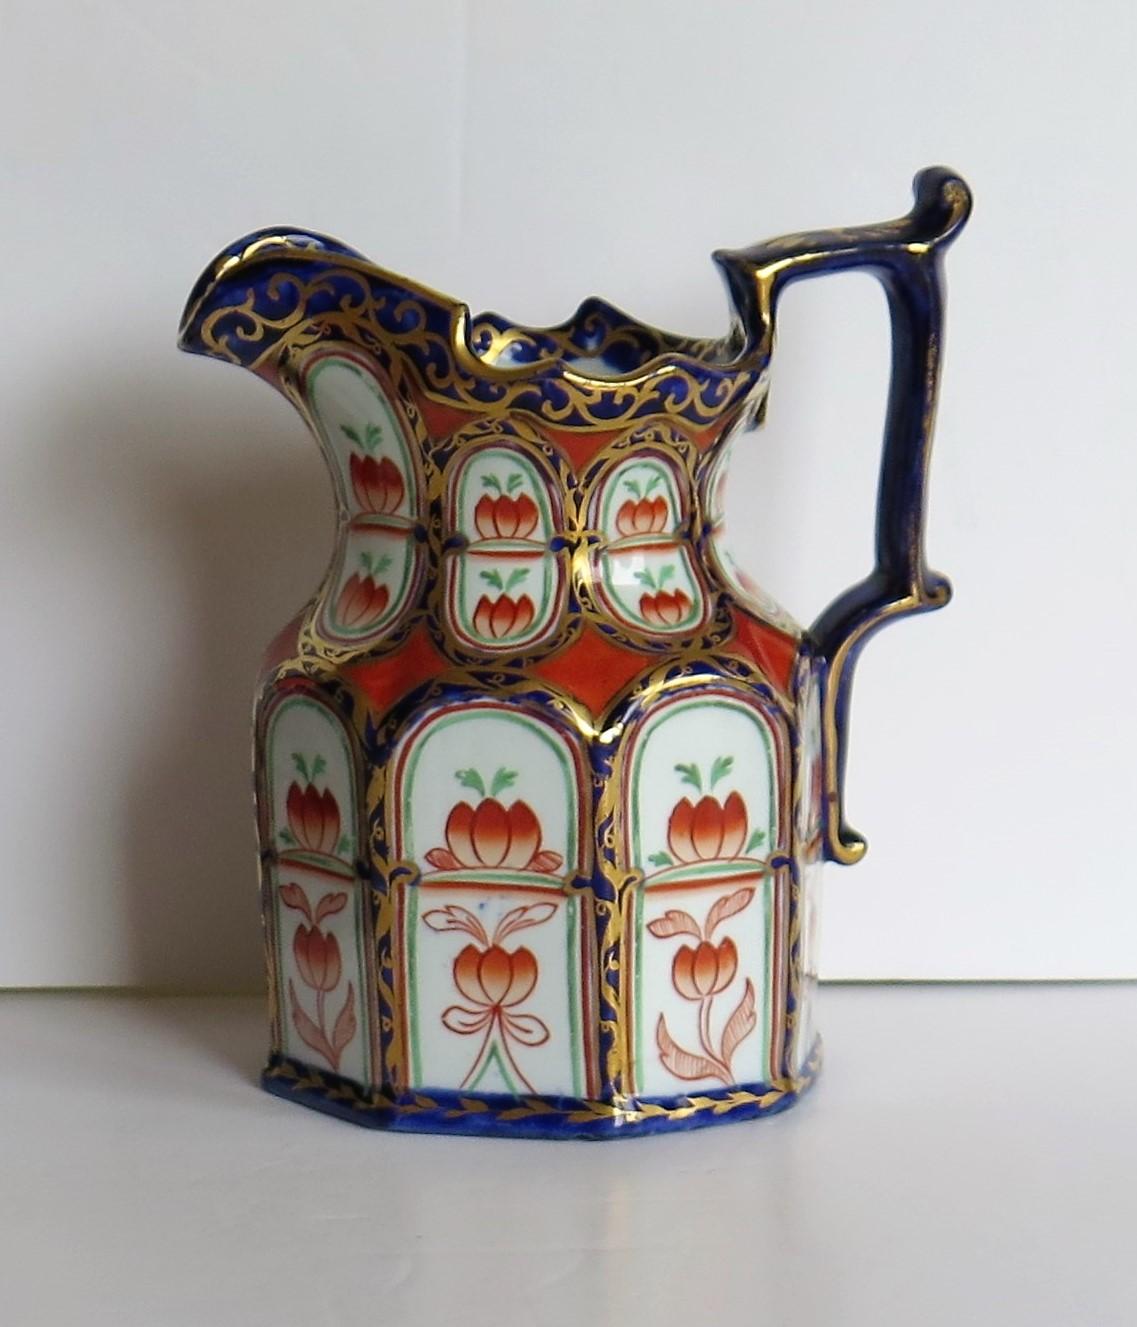 This is a rare jug or pitcher with Gothic style arched panels and hand painted gilded pattern made by Mason's ironstone pottery, circa 1835.

This jug has a rare shape, a very rare pattern and a rarely seen red Mason's printed mark to the